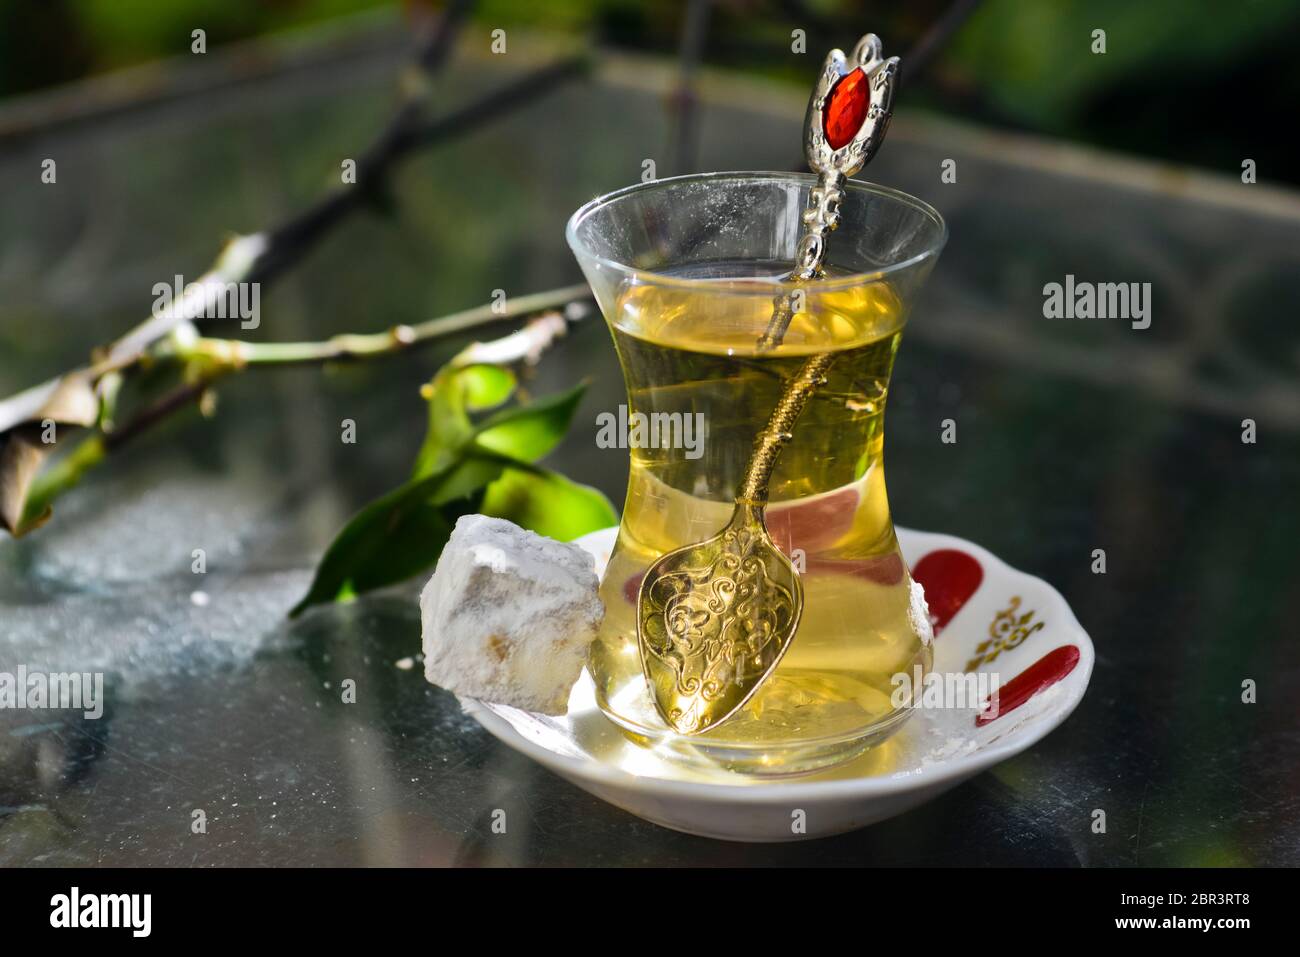 Turkish apple tea and sweet (turkish delights), served on a glass table in a garden Stock Photo